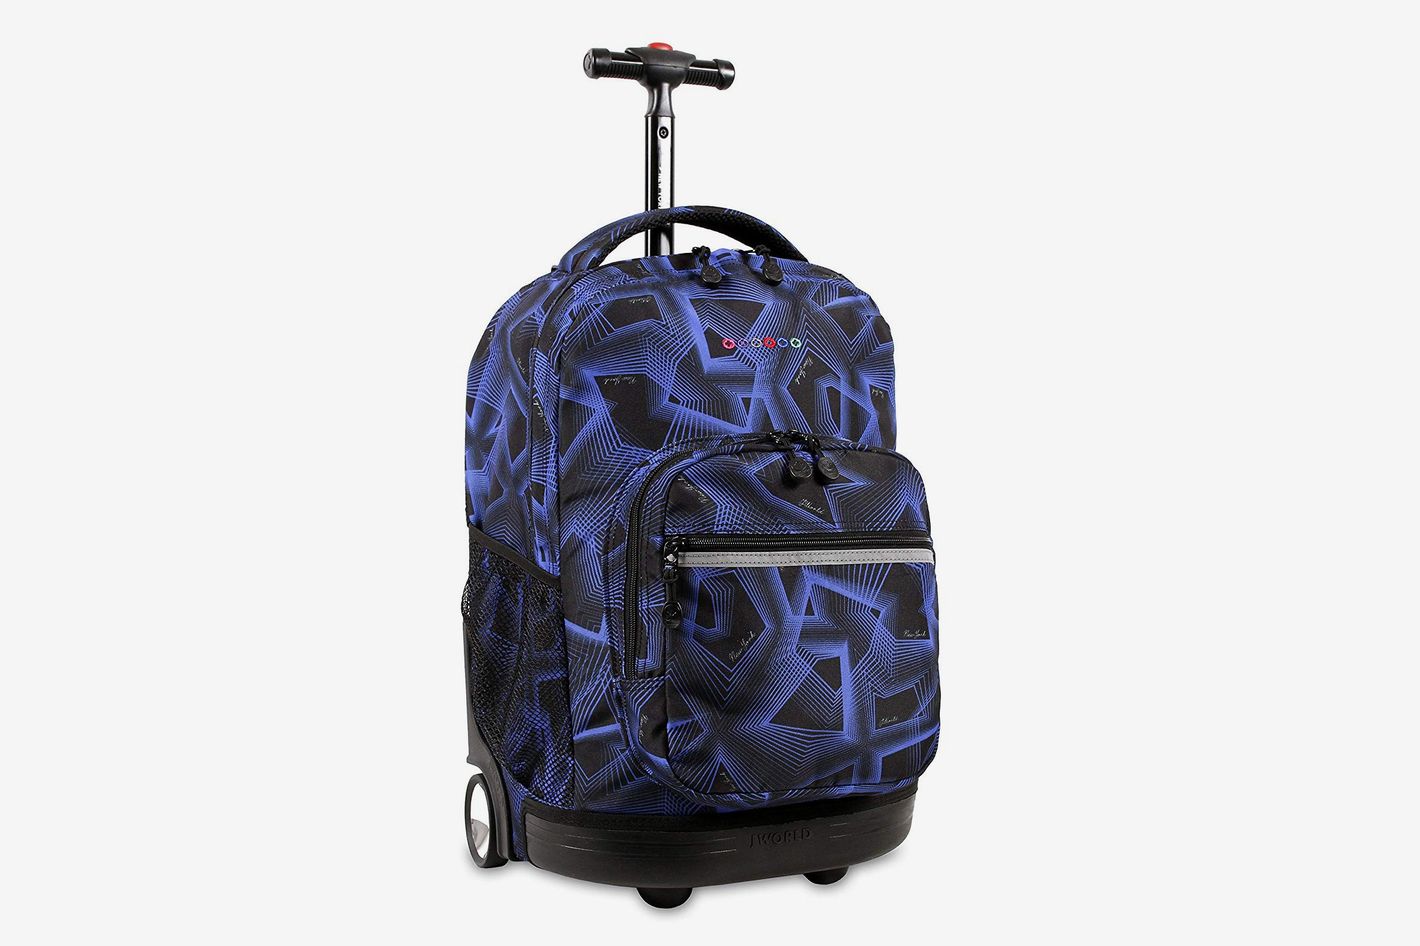 Ecology catch Similarity 9 Best Rolling Backpacks 2018 | The Strategist